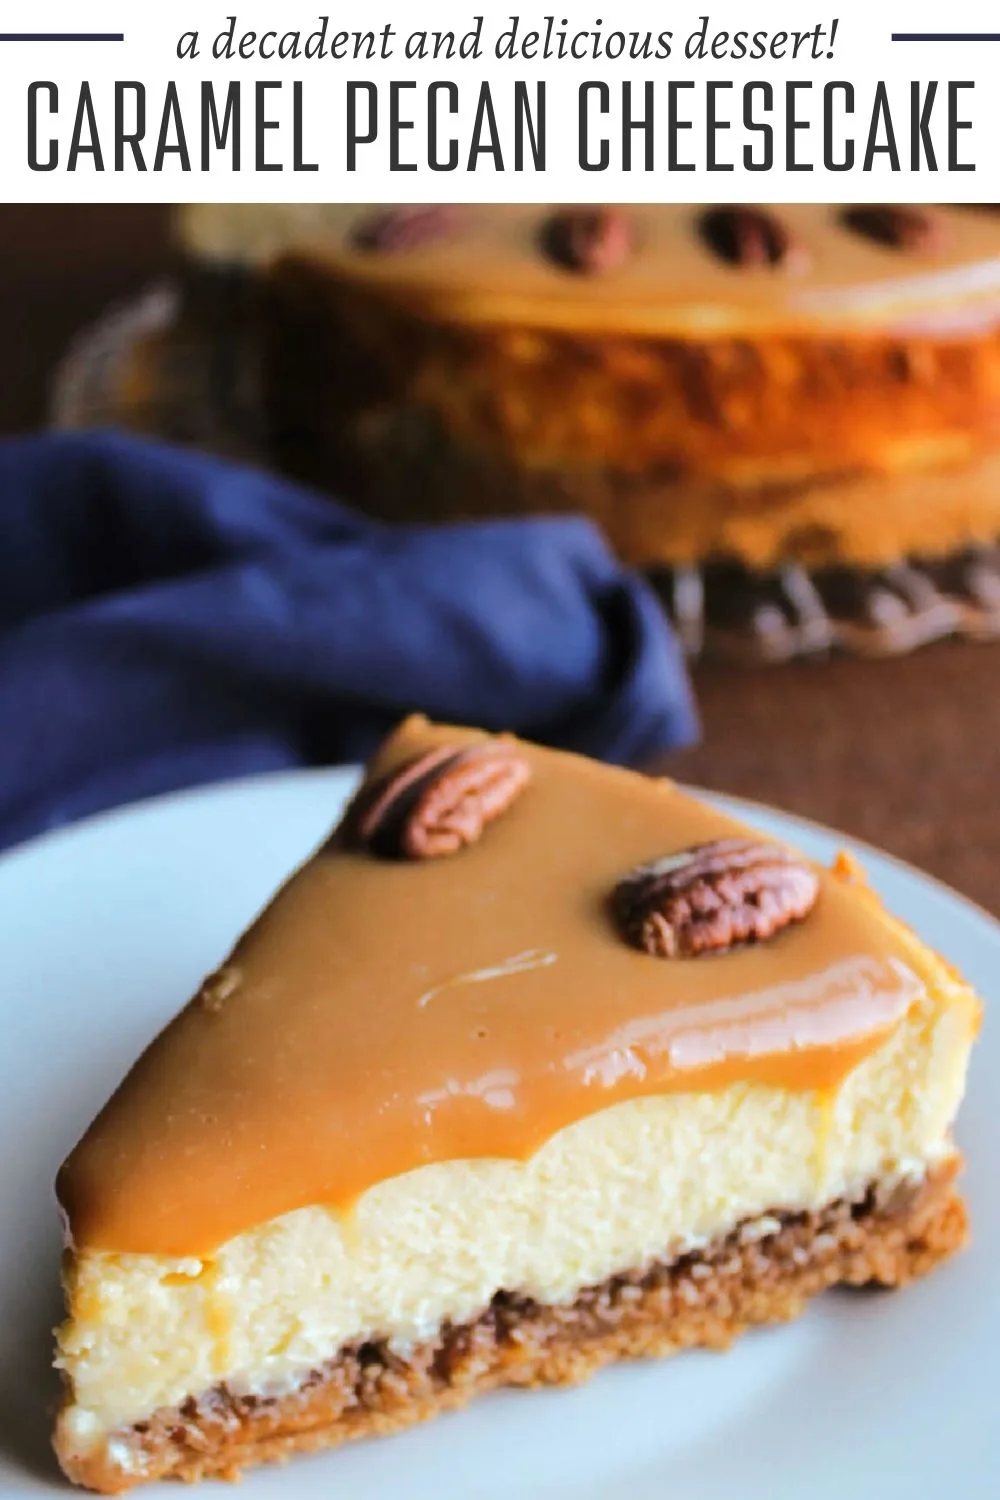 Rich and creamy cheesecake, sweet and gooey caramel, and toasty pecan come together for a one of a kind dessert experience. Perfect for dinner parties, birthday parties or a great addition to your Thanksgiving dessert table!